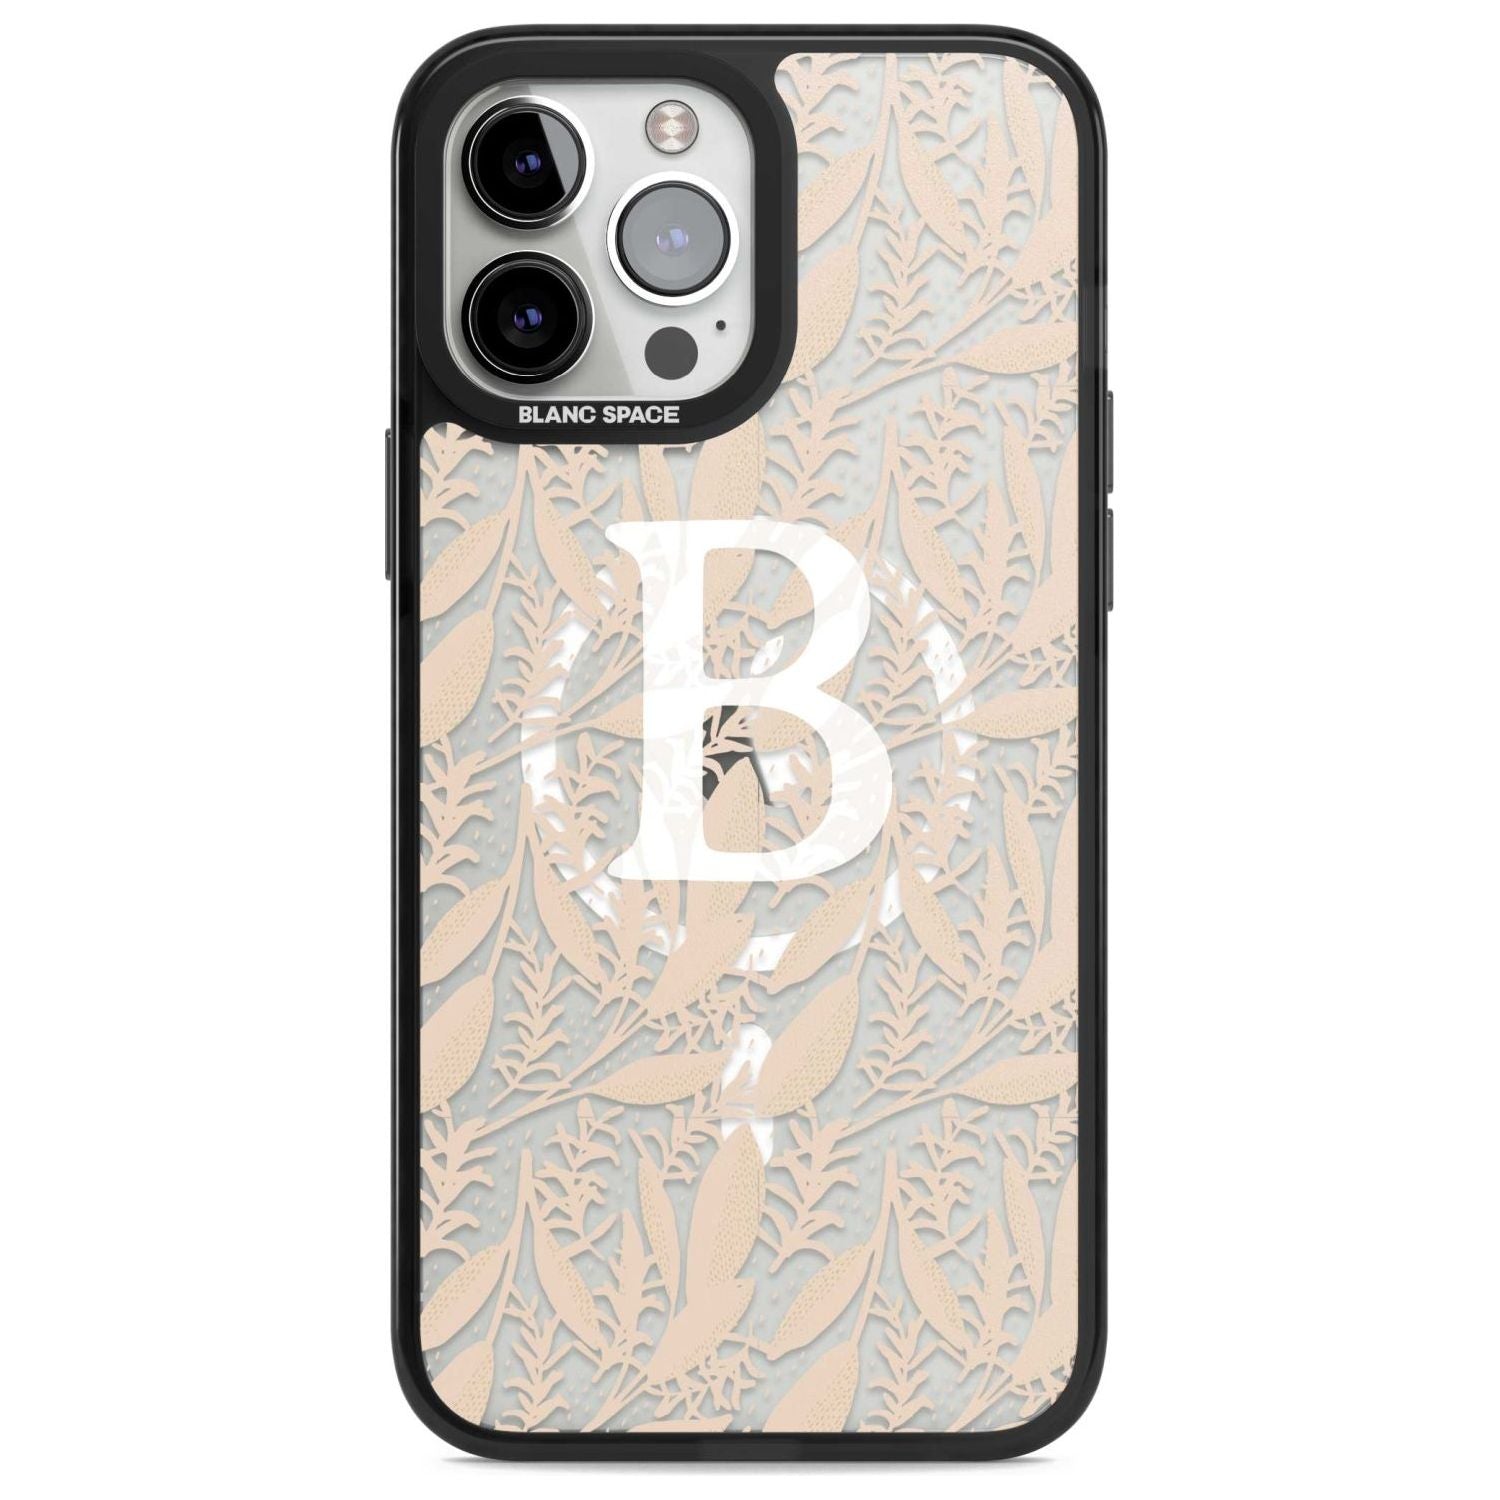 Personalised Subtle Monogram Abstract Floral Custom Phone Case iPhone 13 Pro Max / Magsafe Black Impact Case Blanc Space